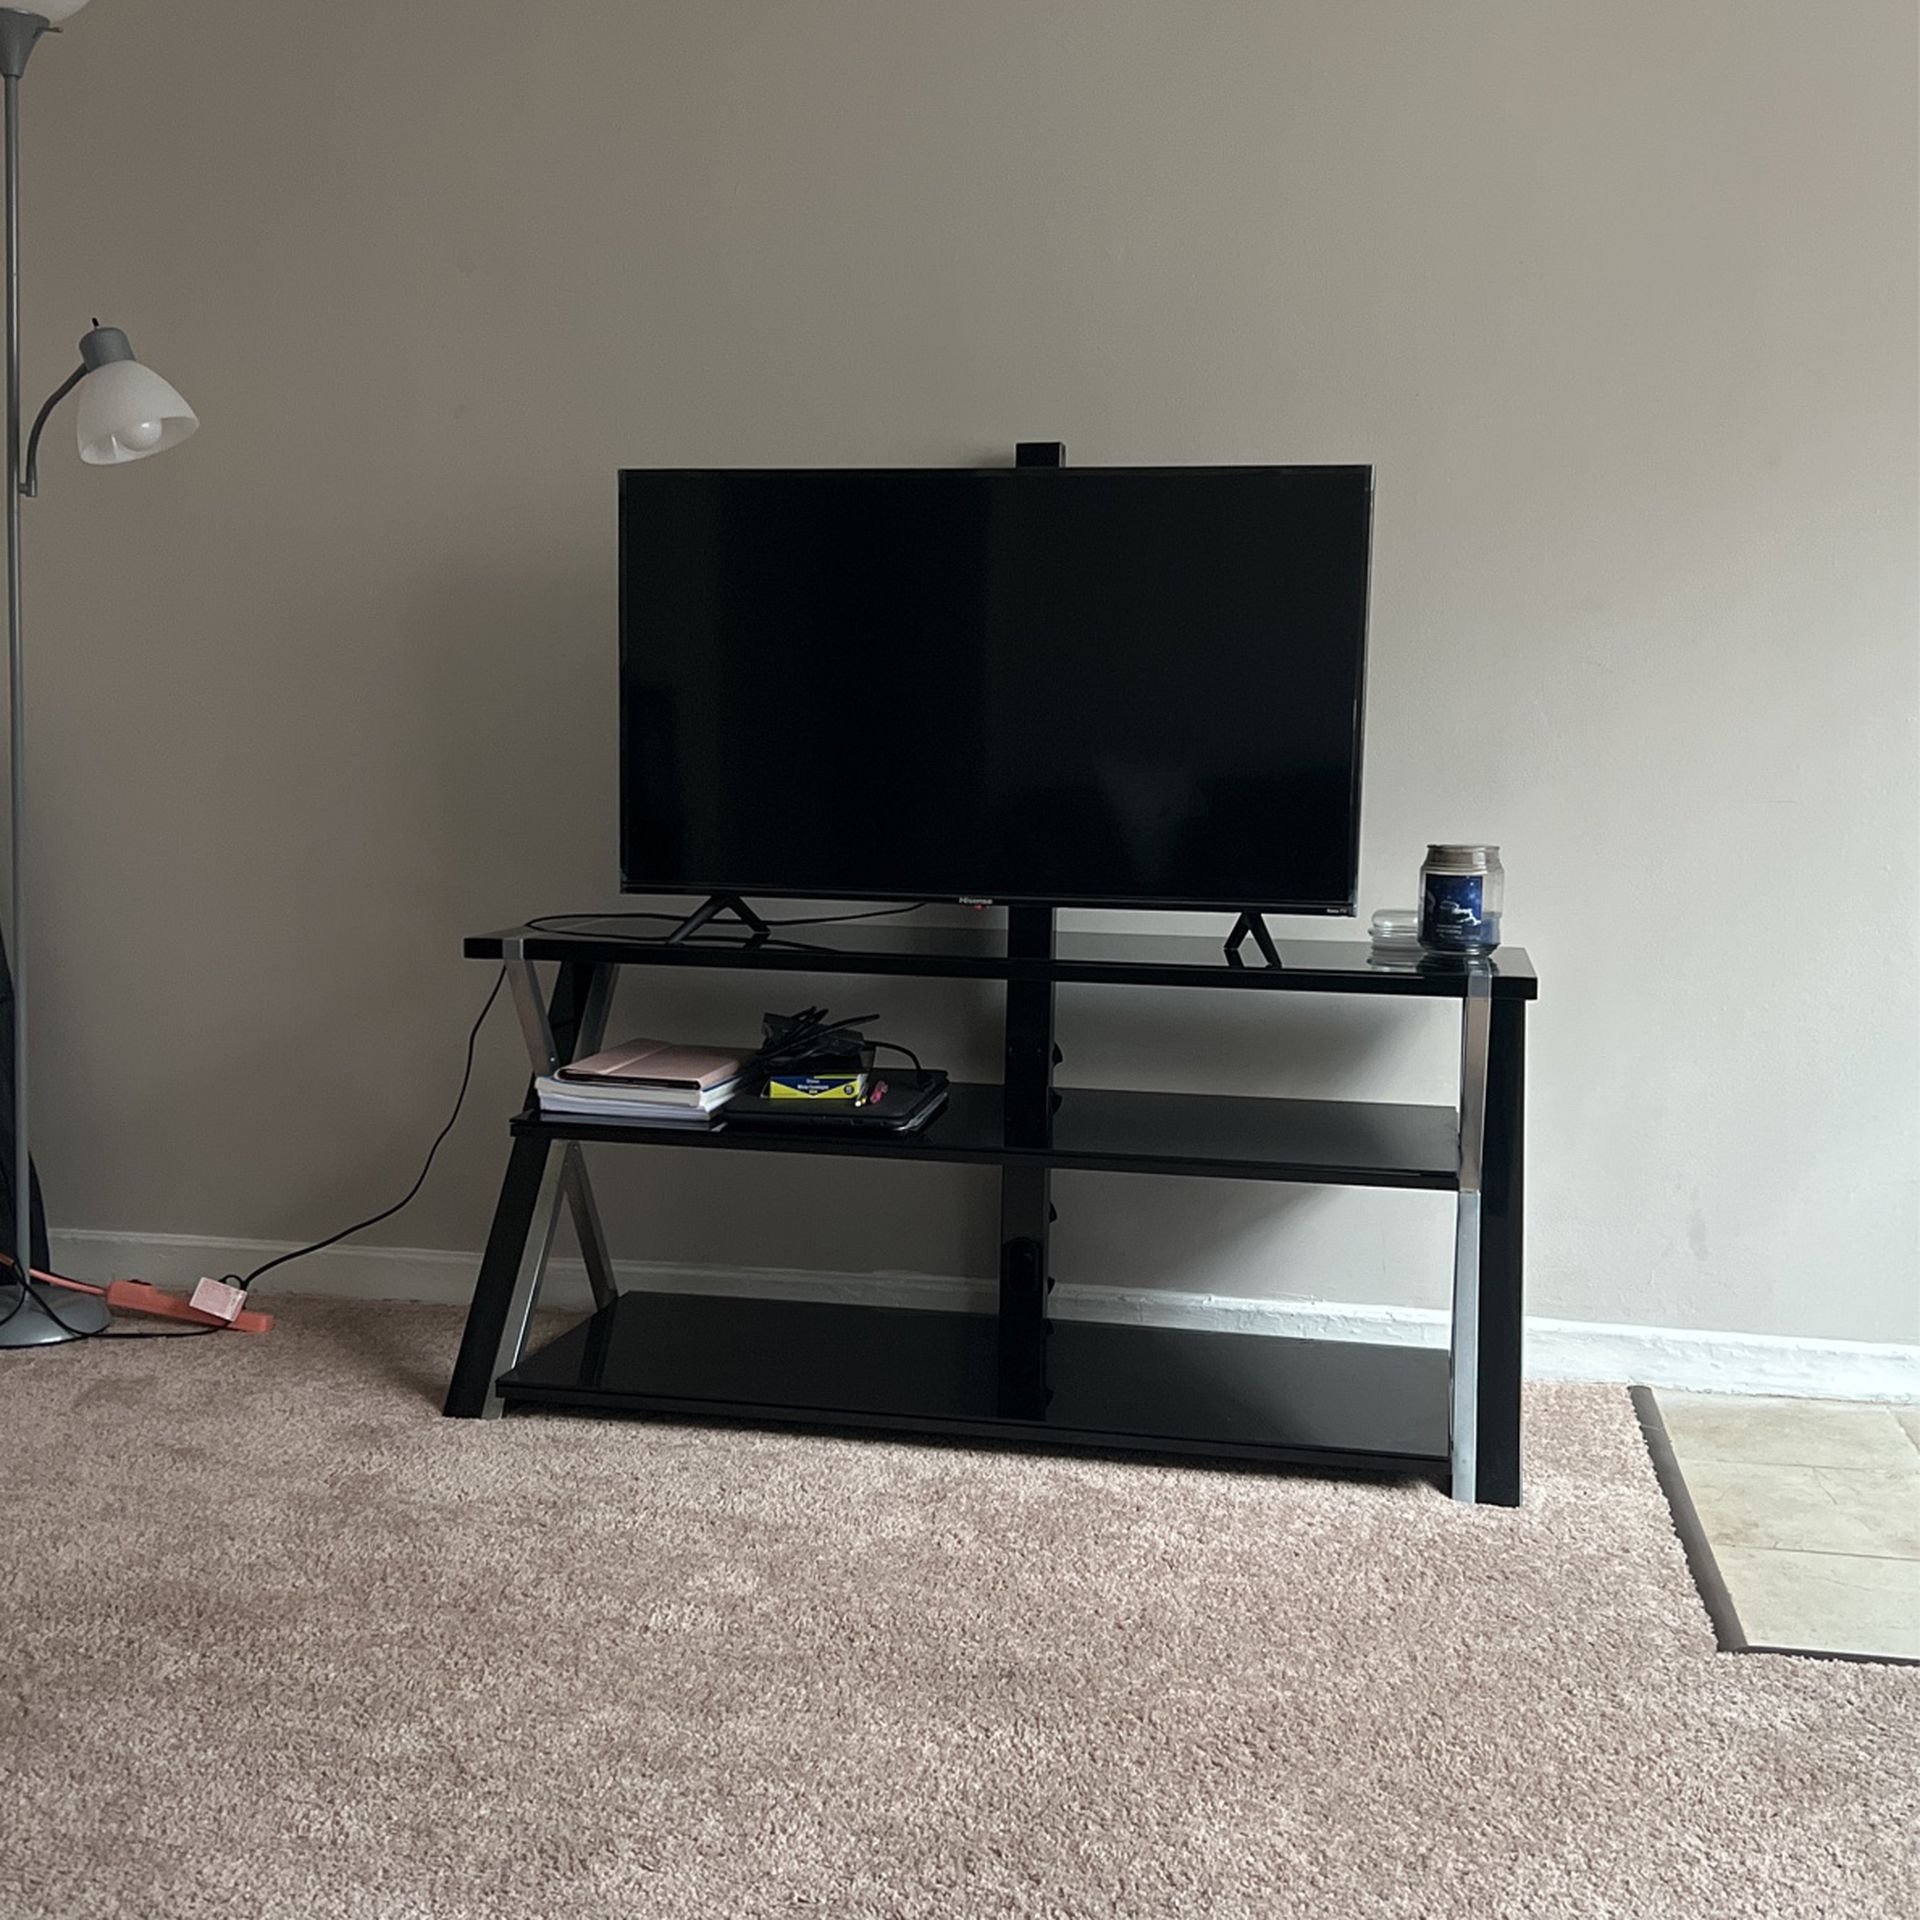 3 In-1 TV Stand